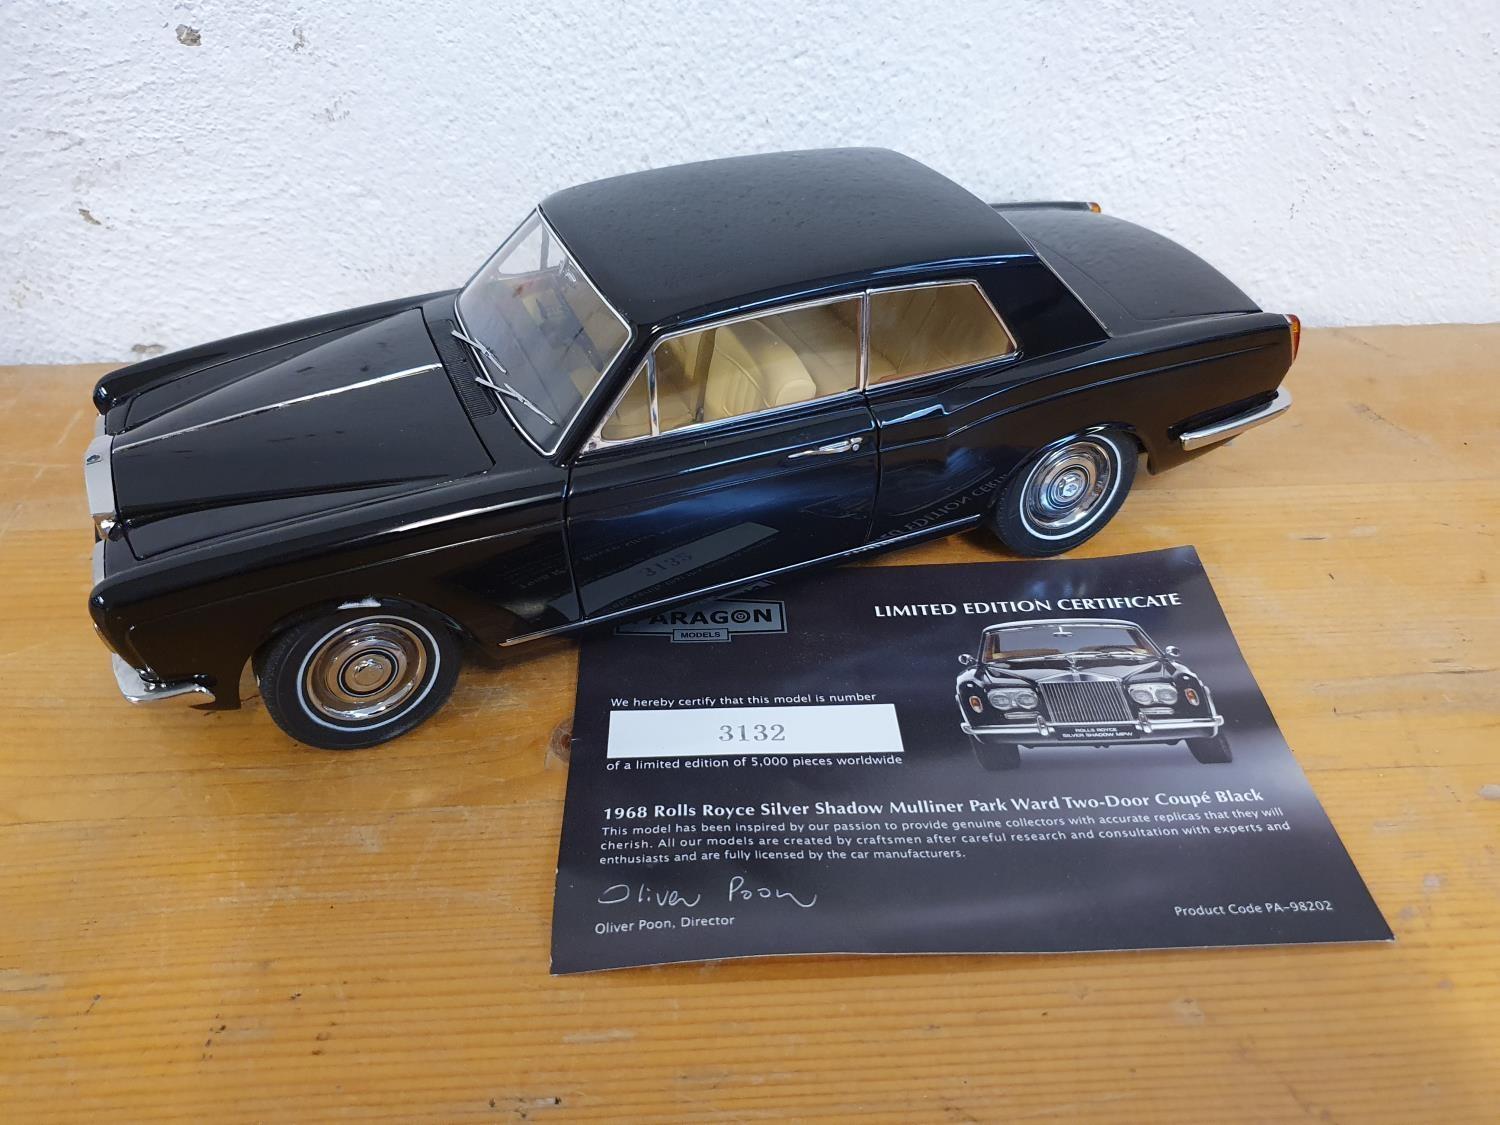 Paragon, die cast, scale 1:18, 1968 Rolls Royce Silver Shadow Mulliner Park Ward two door coupe